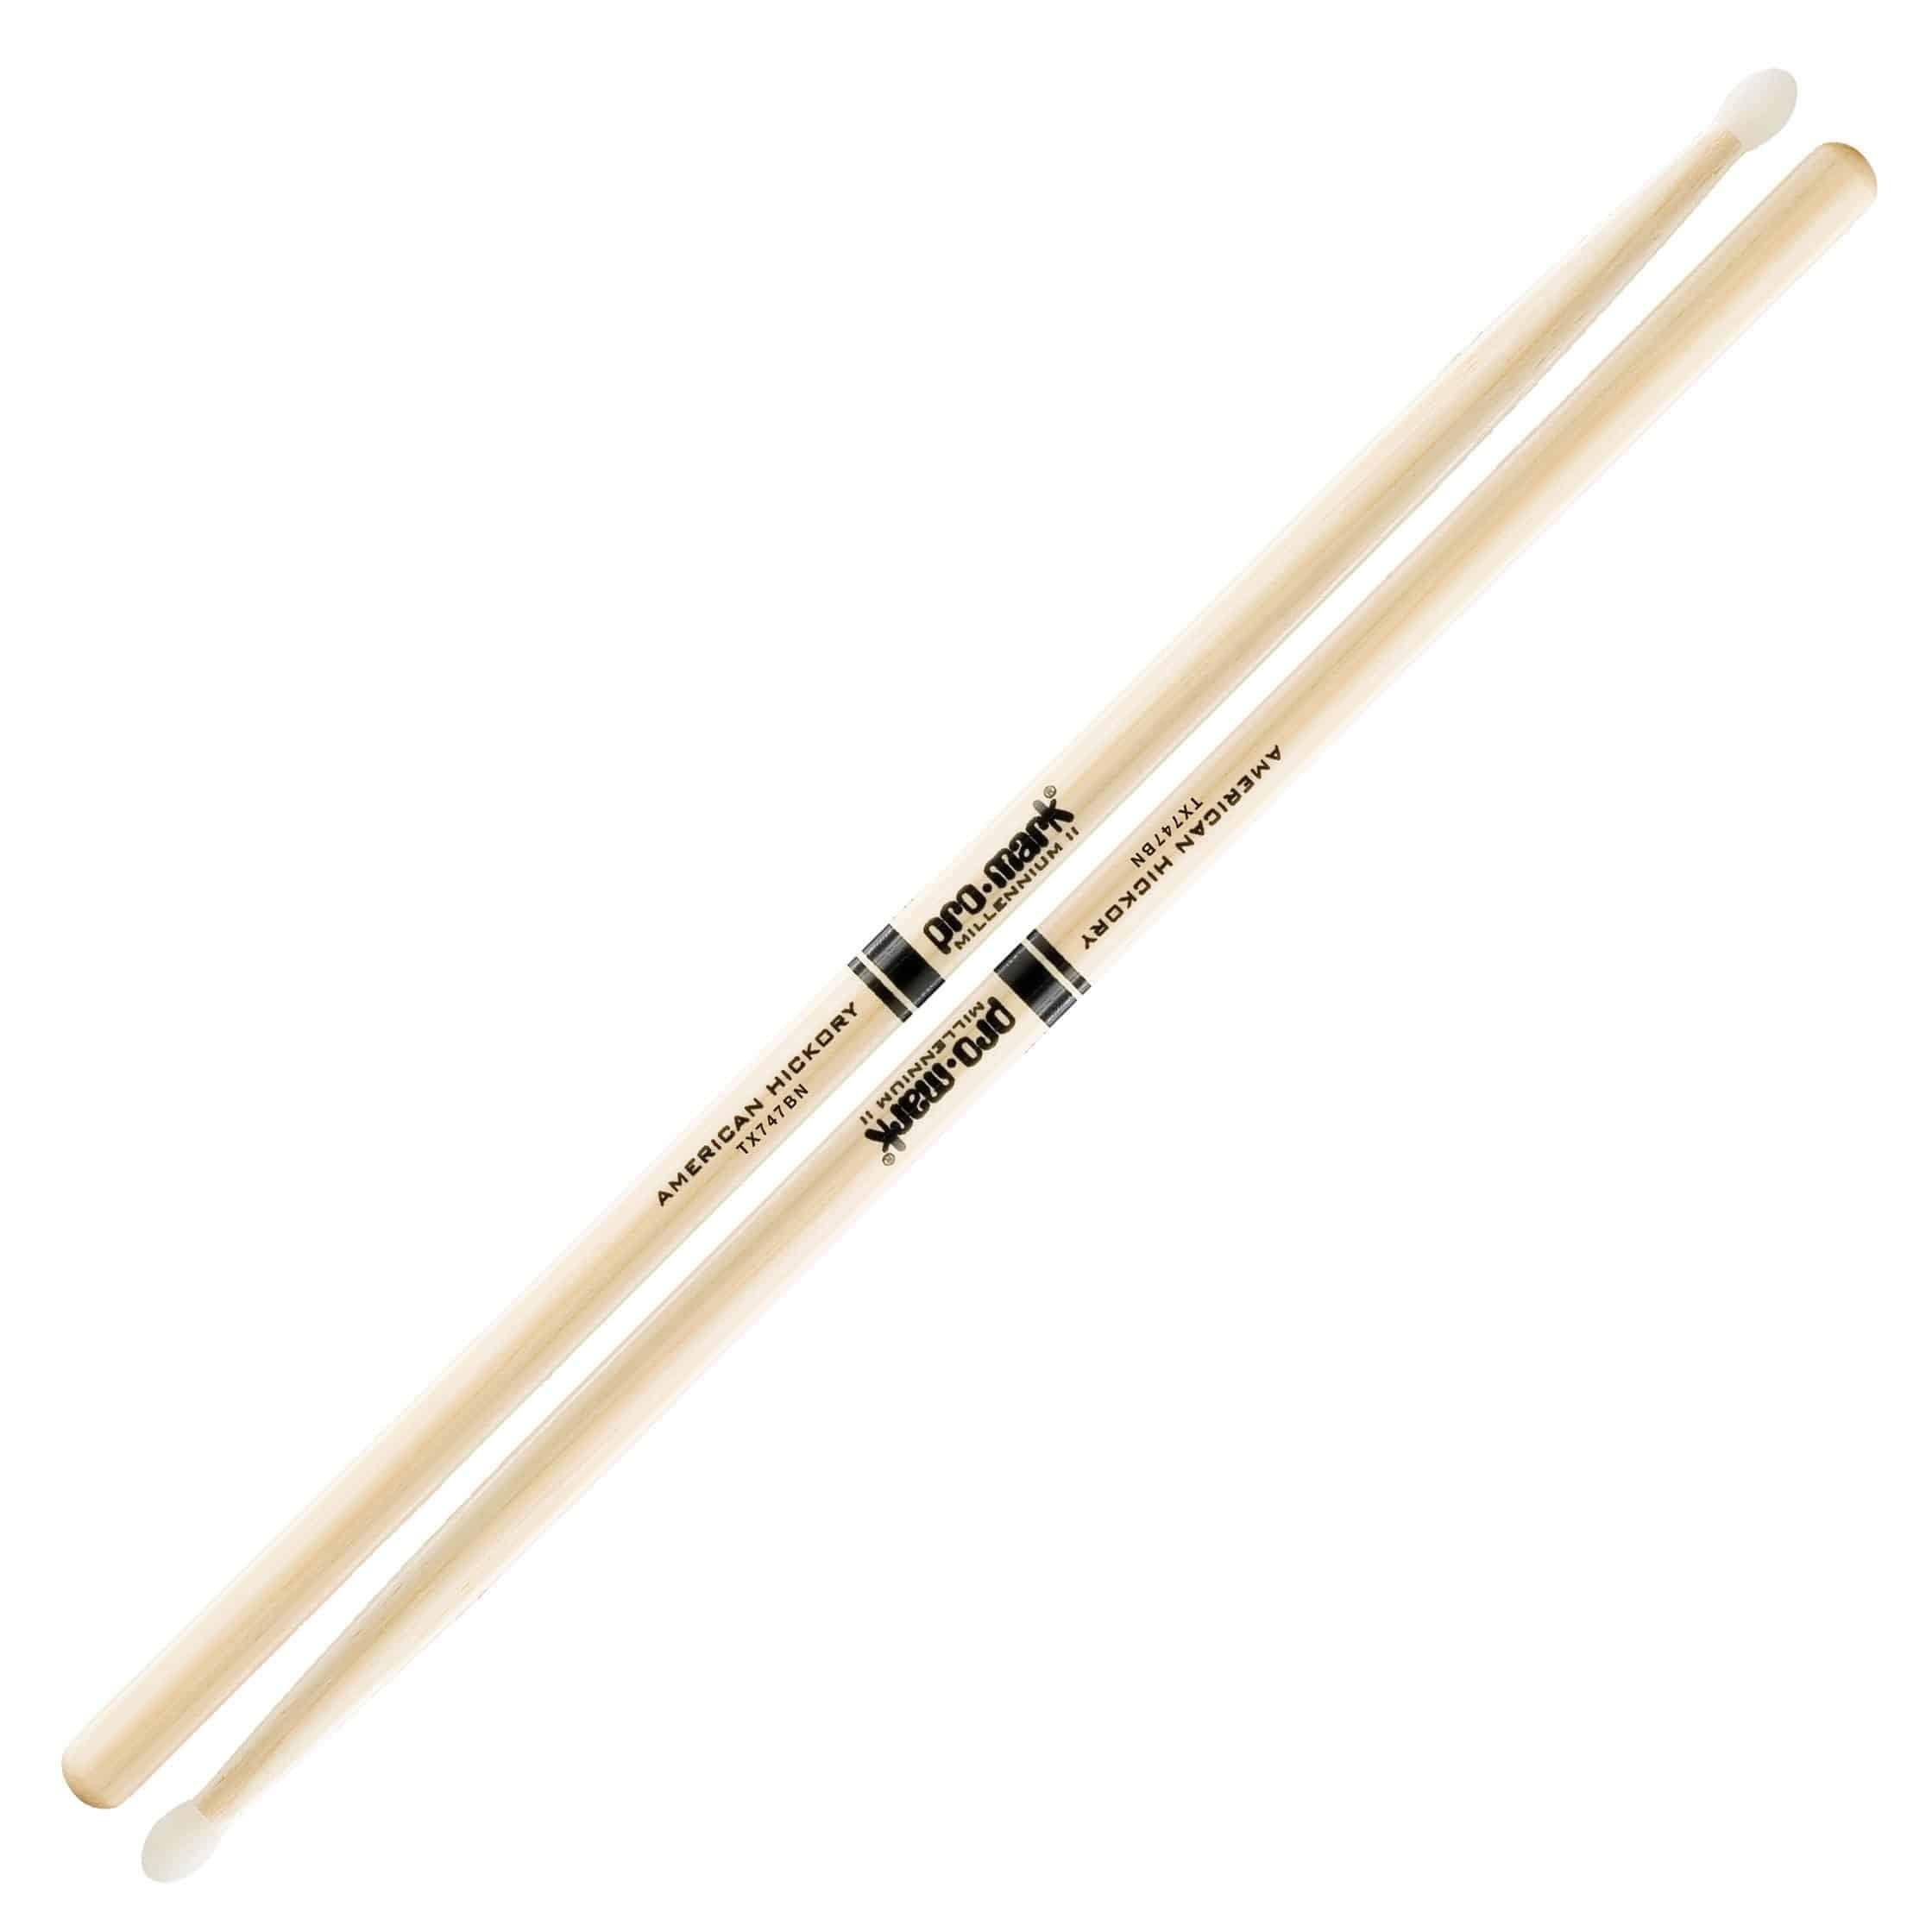 Promark - 747B Nylon Tip Drumsticks Super Rock American Hickory - Drums & Percussion - Sticks & Mallets by Promark at Muso's Stuff